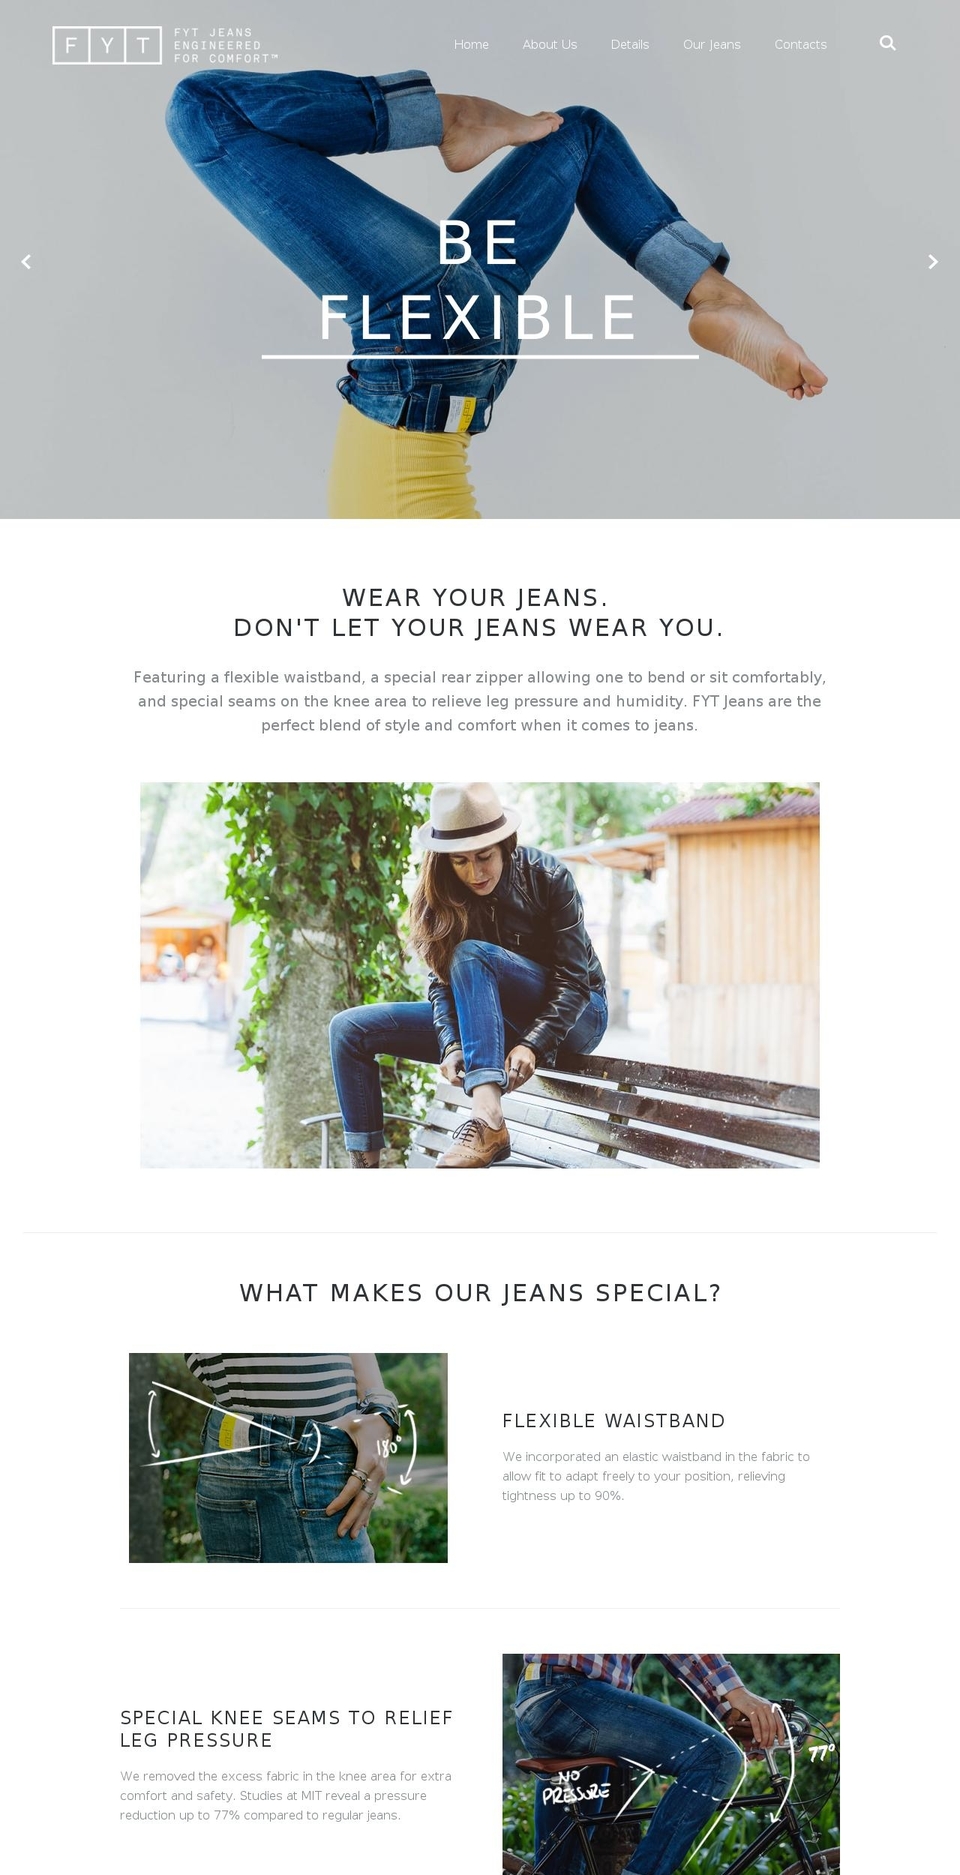 Startup Shopify theme site example fytjeans.com